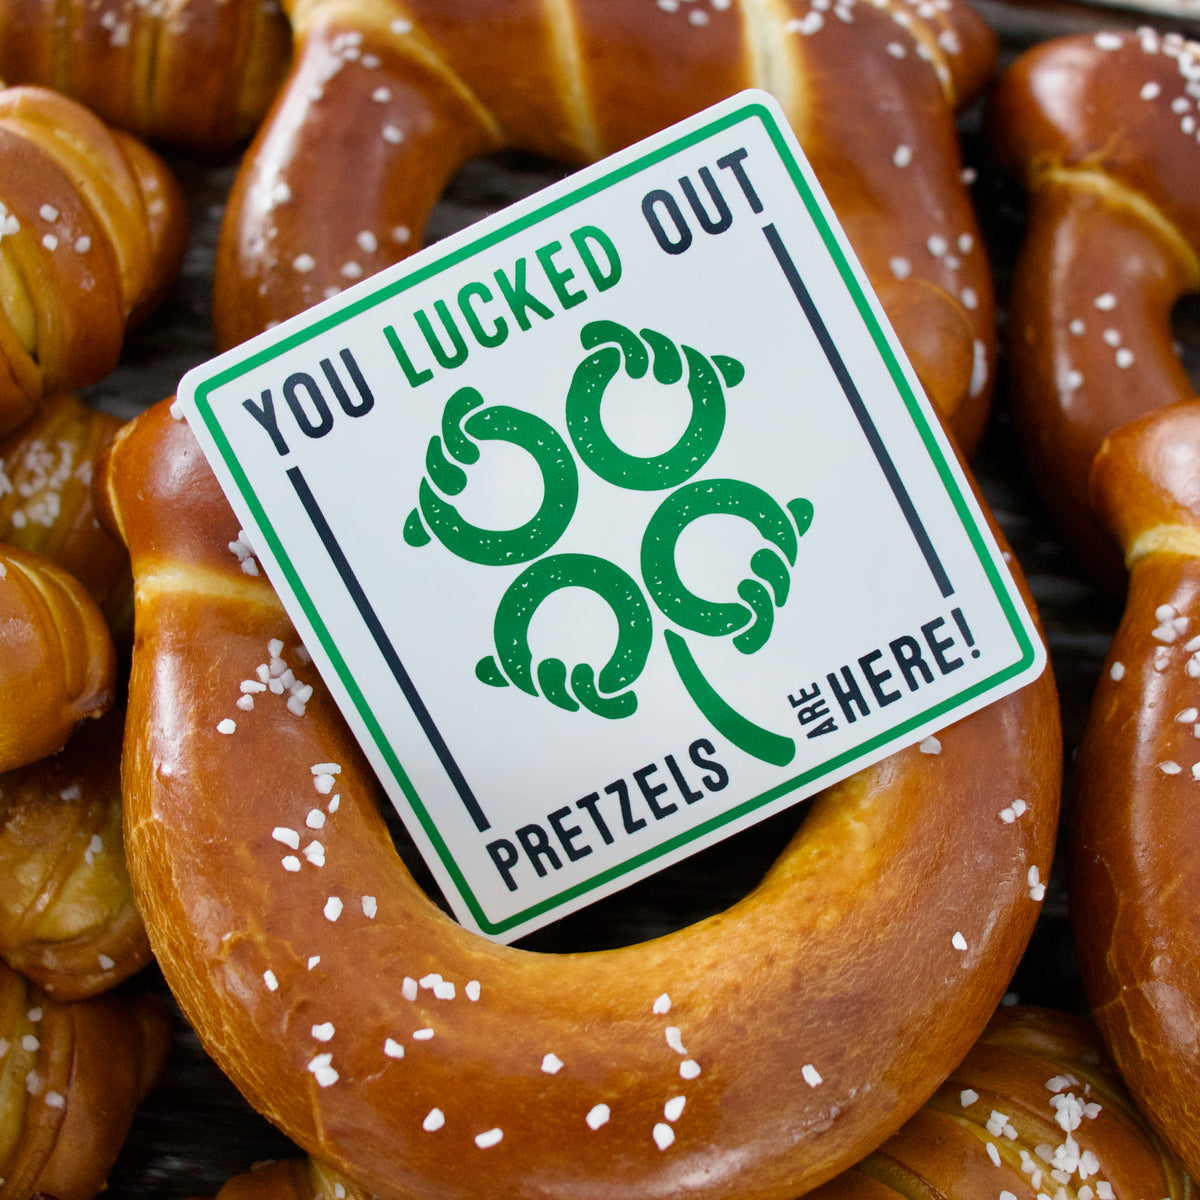 "You Lucked Out" Gourmet Soft Pretzel Pack